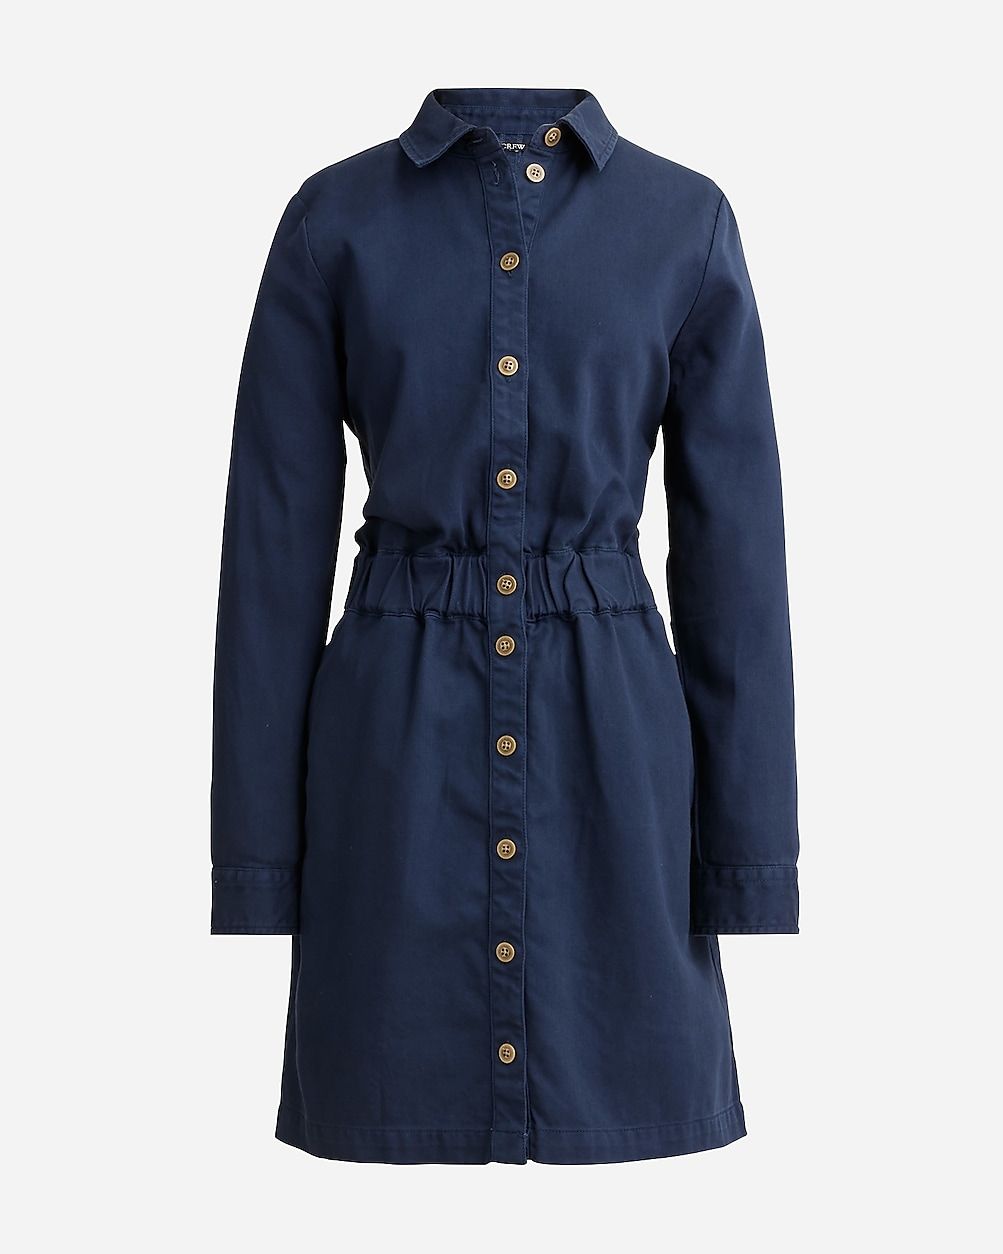 Long-sleeve button-front chino dress | J.Crew US